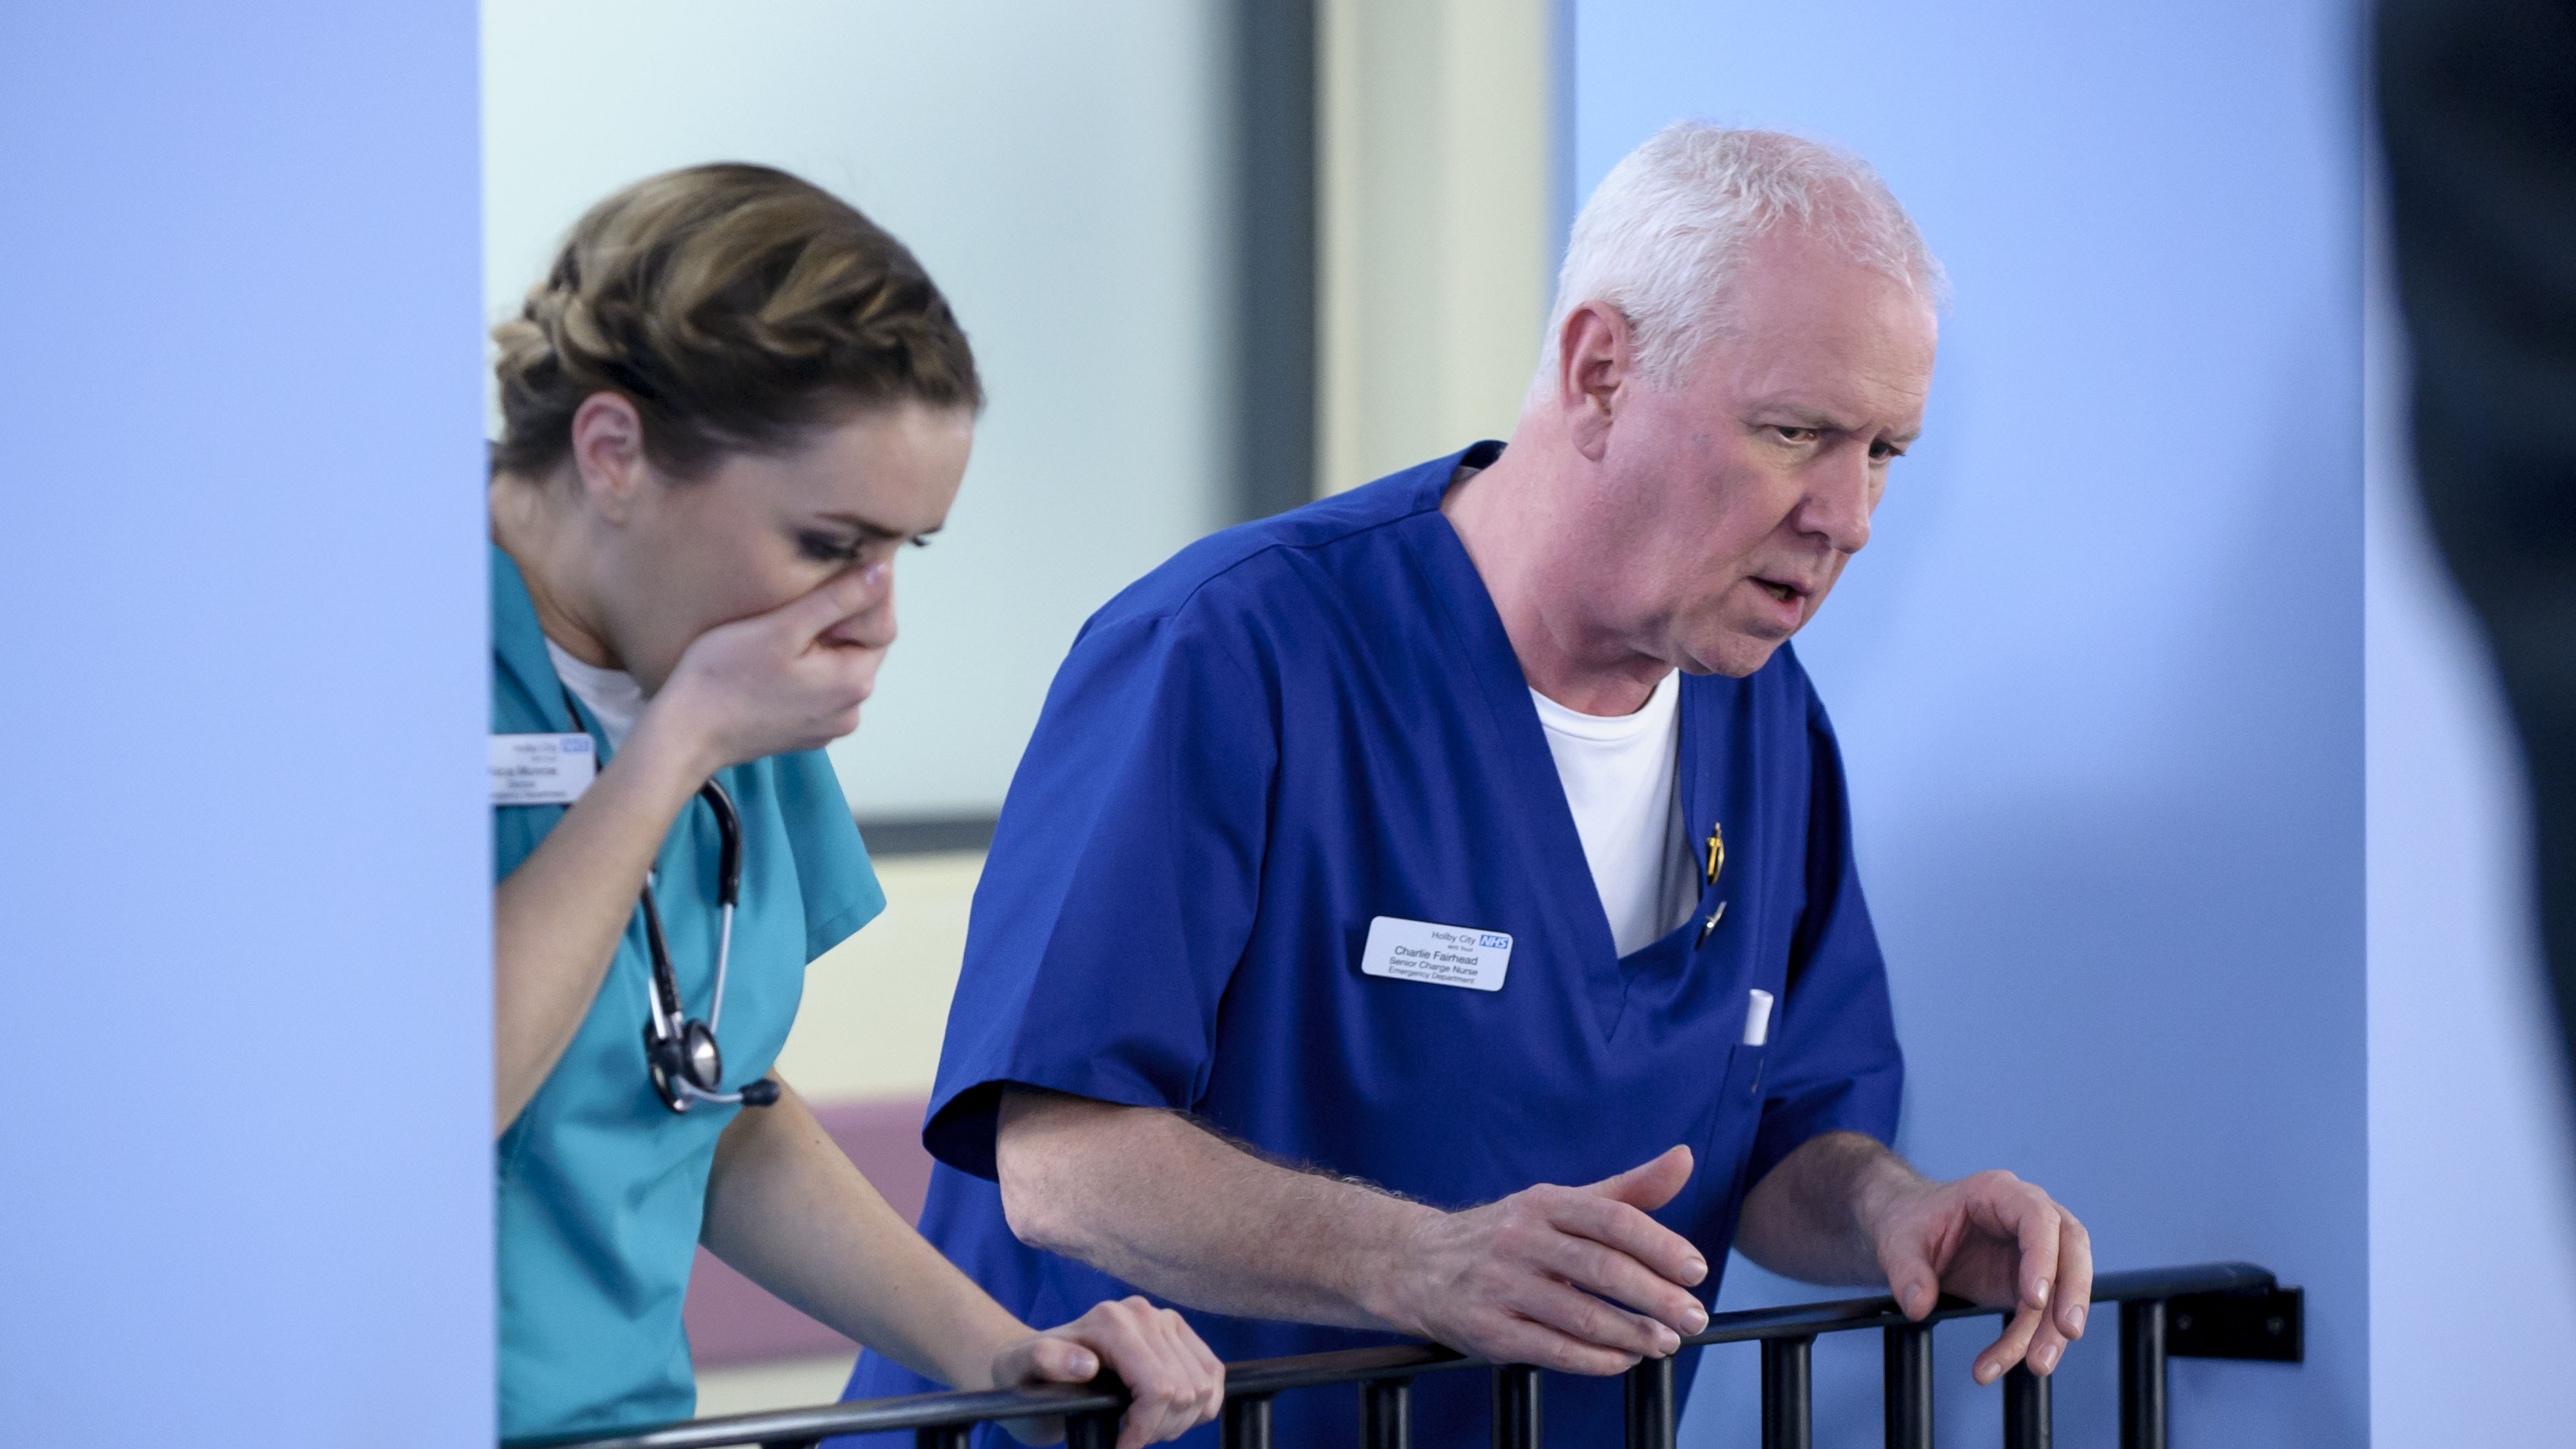 Casualty: Sam Strachan actor Tom Chambers to LEAVE soap role - but